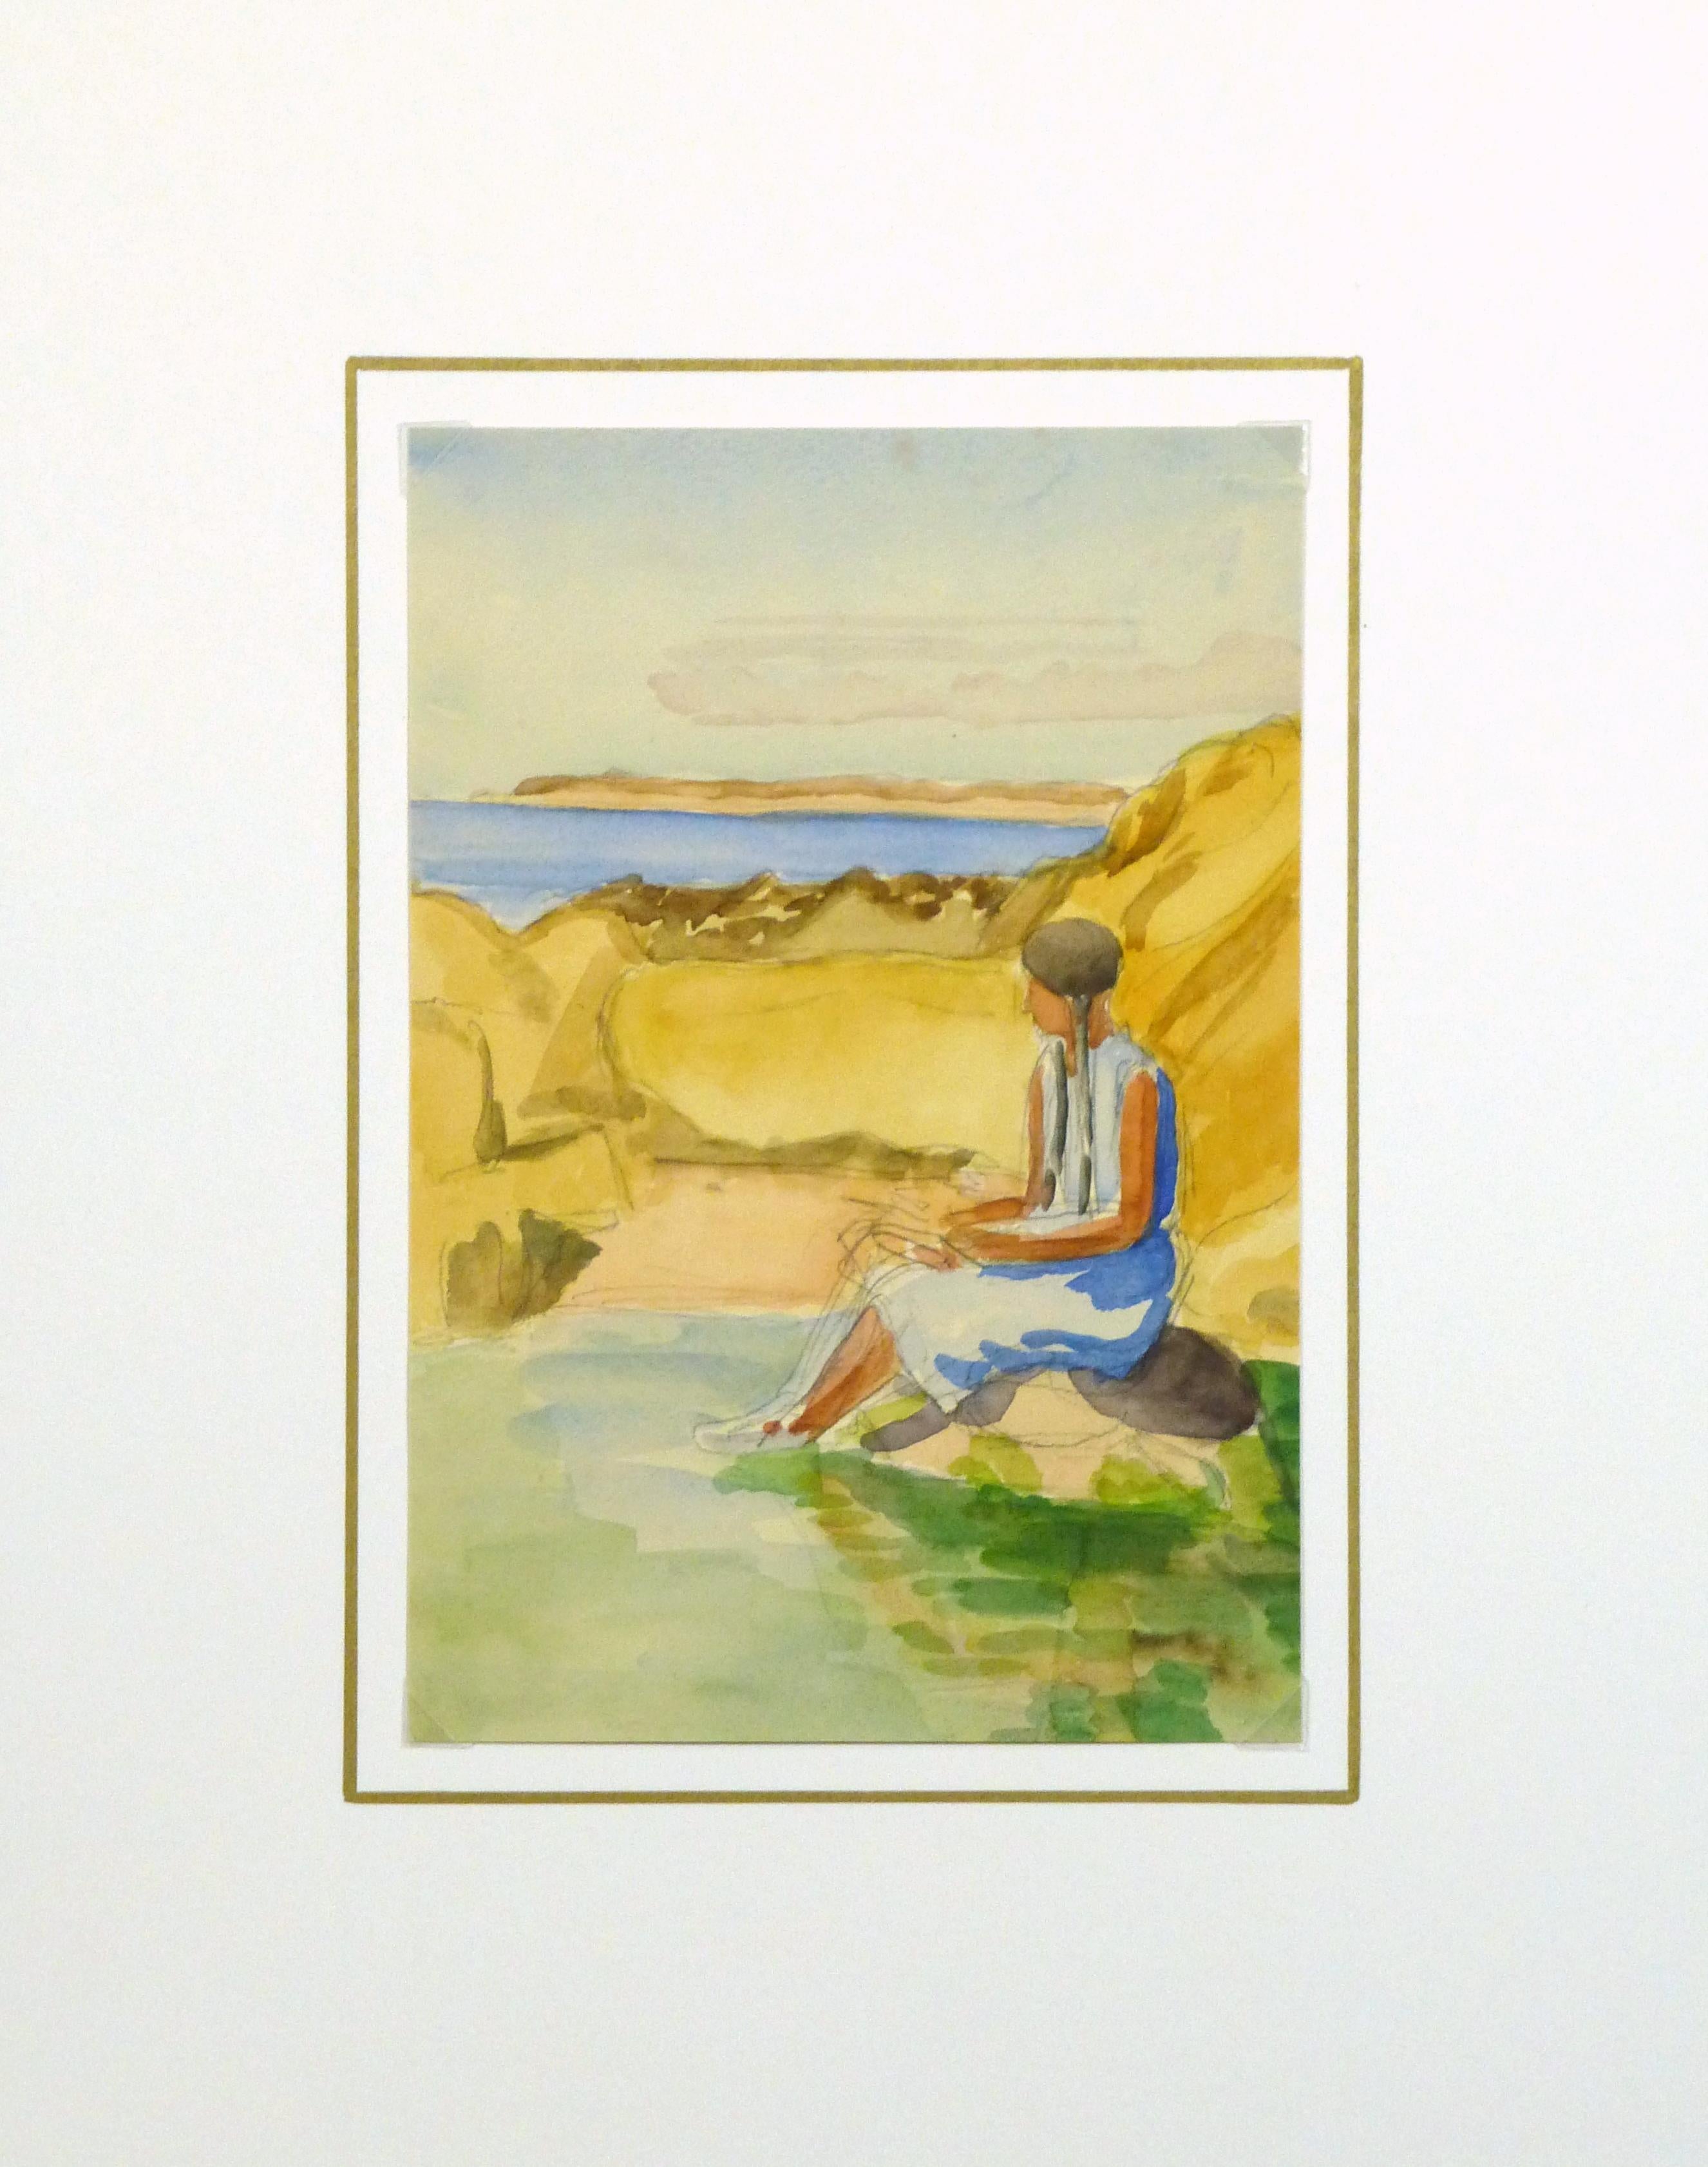 Lively watercolor painting of a woman enjoying the lakeside. 

Displayed in a white mat with a gold border and fits a standard-sized frame. Archival plastic sleeve and Certificate of Authenticity included. Artwork,  8